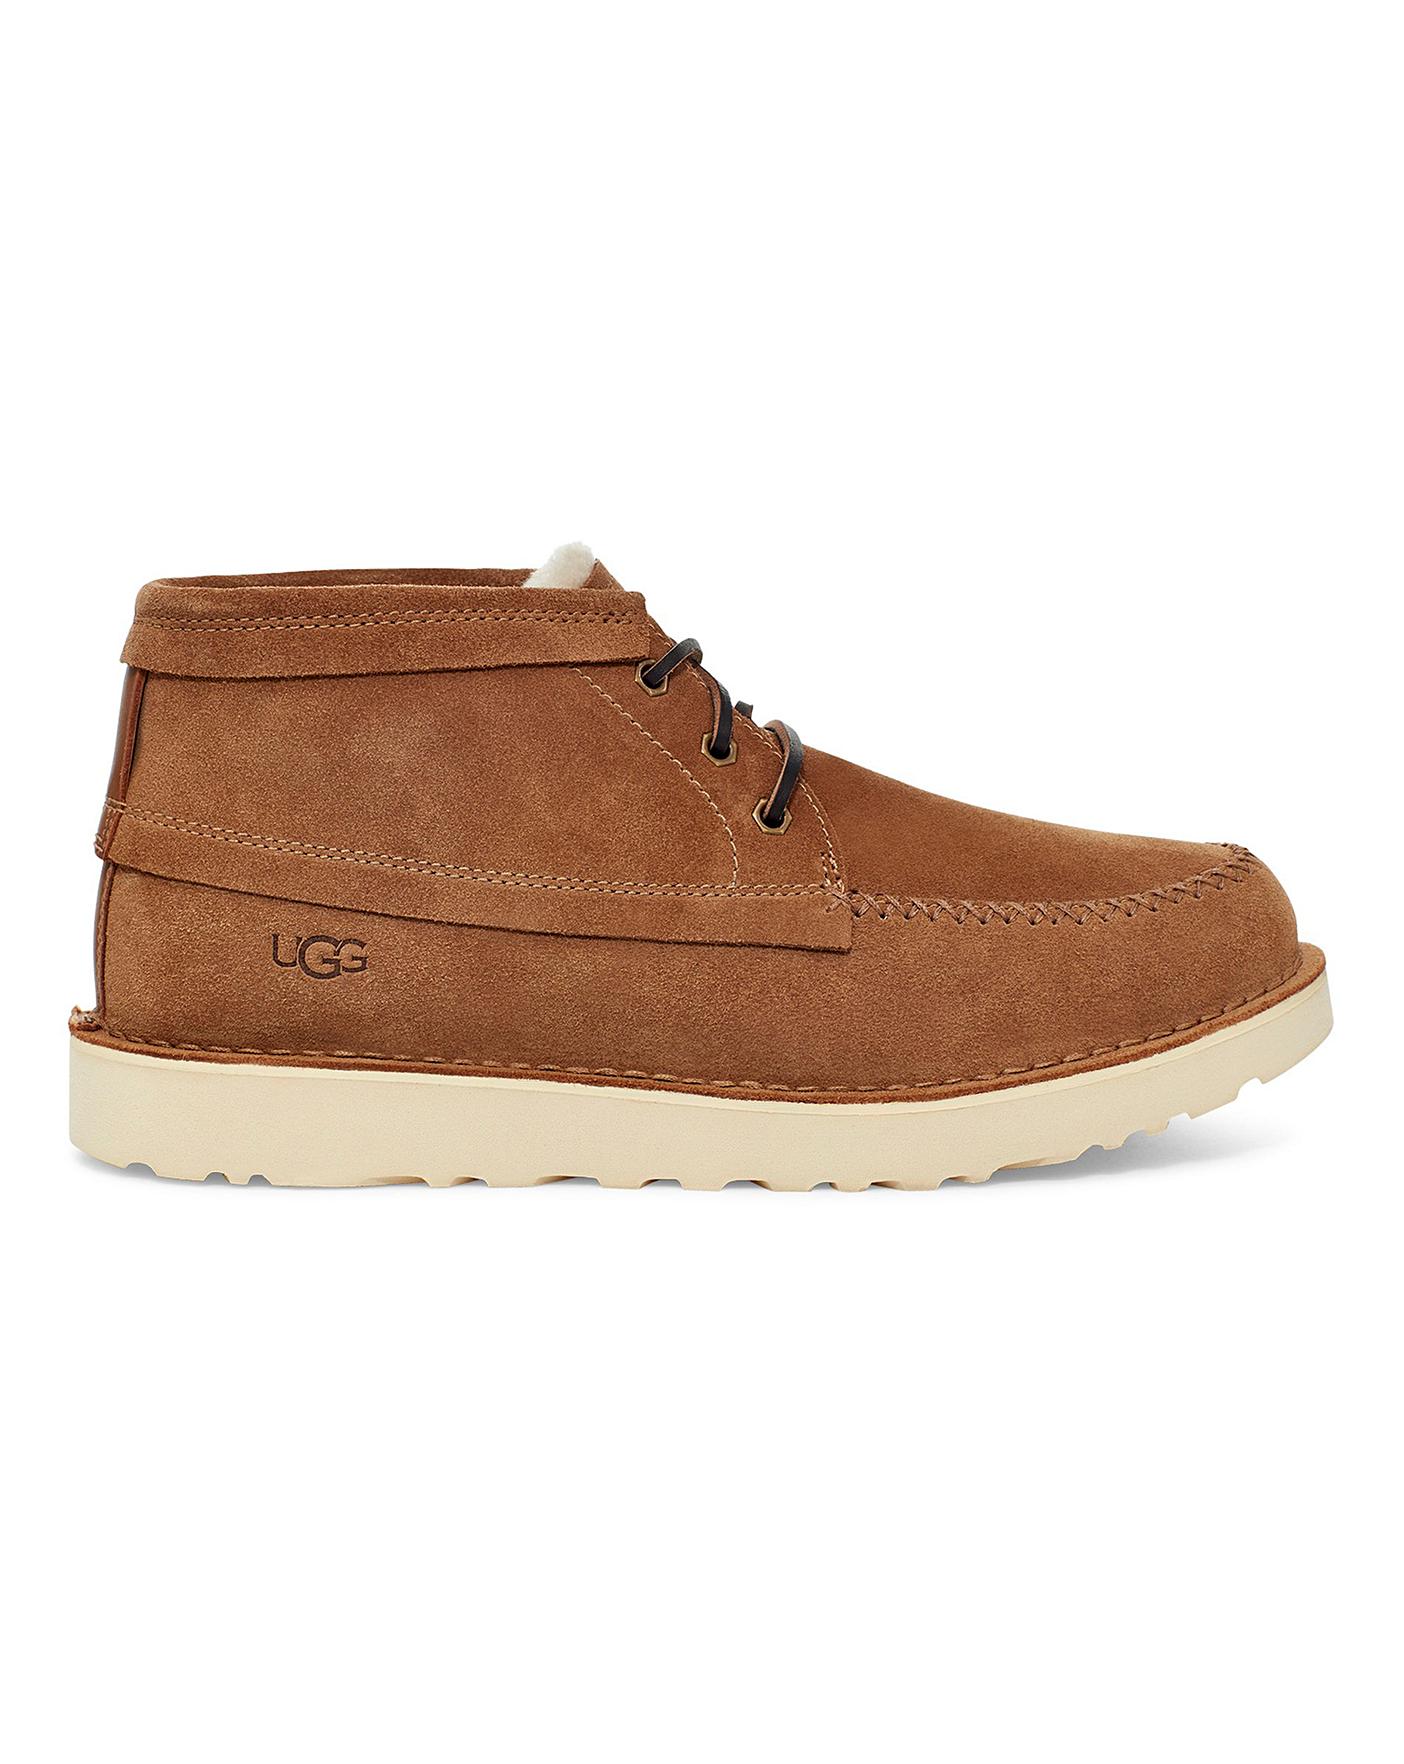 Campout Chukka Boot